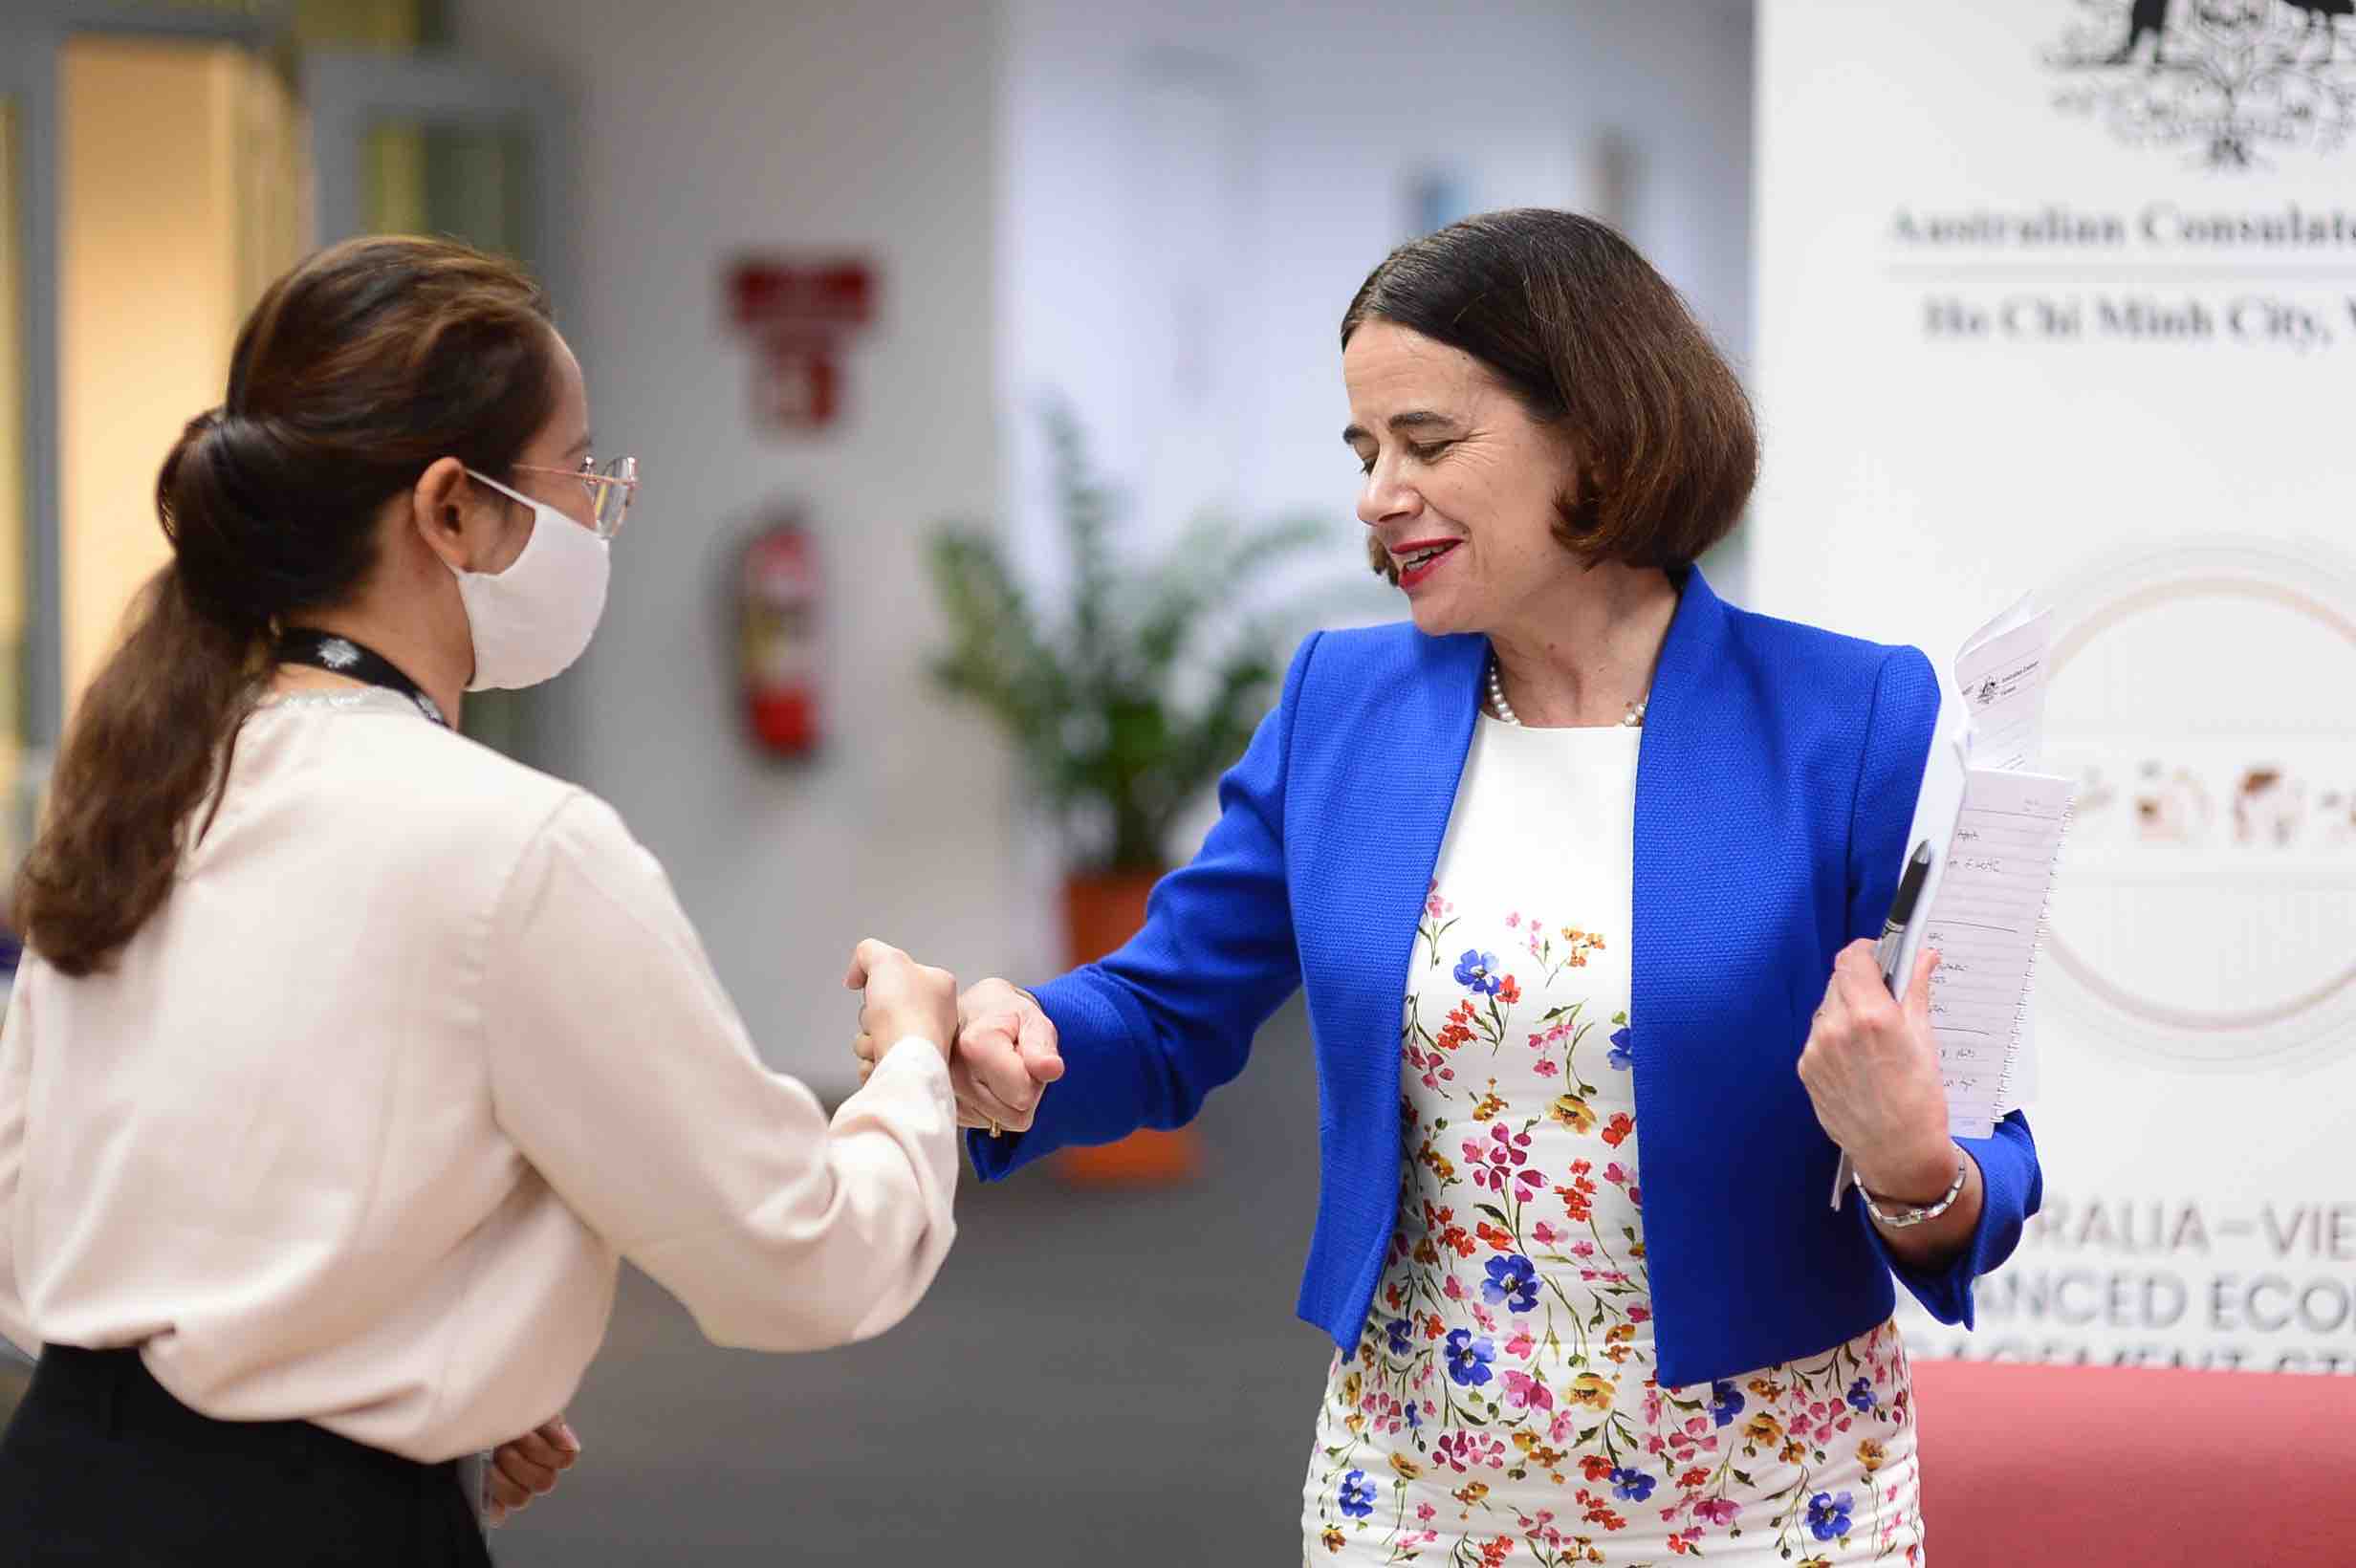 A reporter of Tuoi Tre (Youth) newspaper (left) and Australian Ambassador to Vietnam Robyn Mudie (right) perform a fist bump during an exclusive interview with Tuoi Tre News in Ho Chi Minh City, Vietnam, February 21, 2022. Photo: Quang Dinh / Tuoi Tre